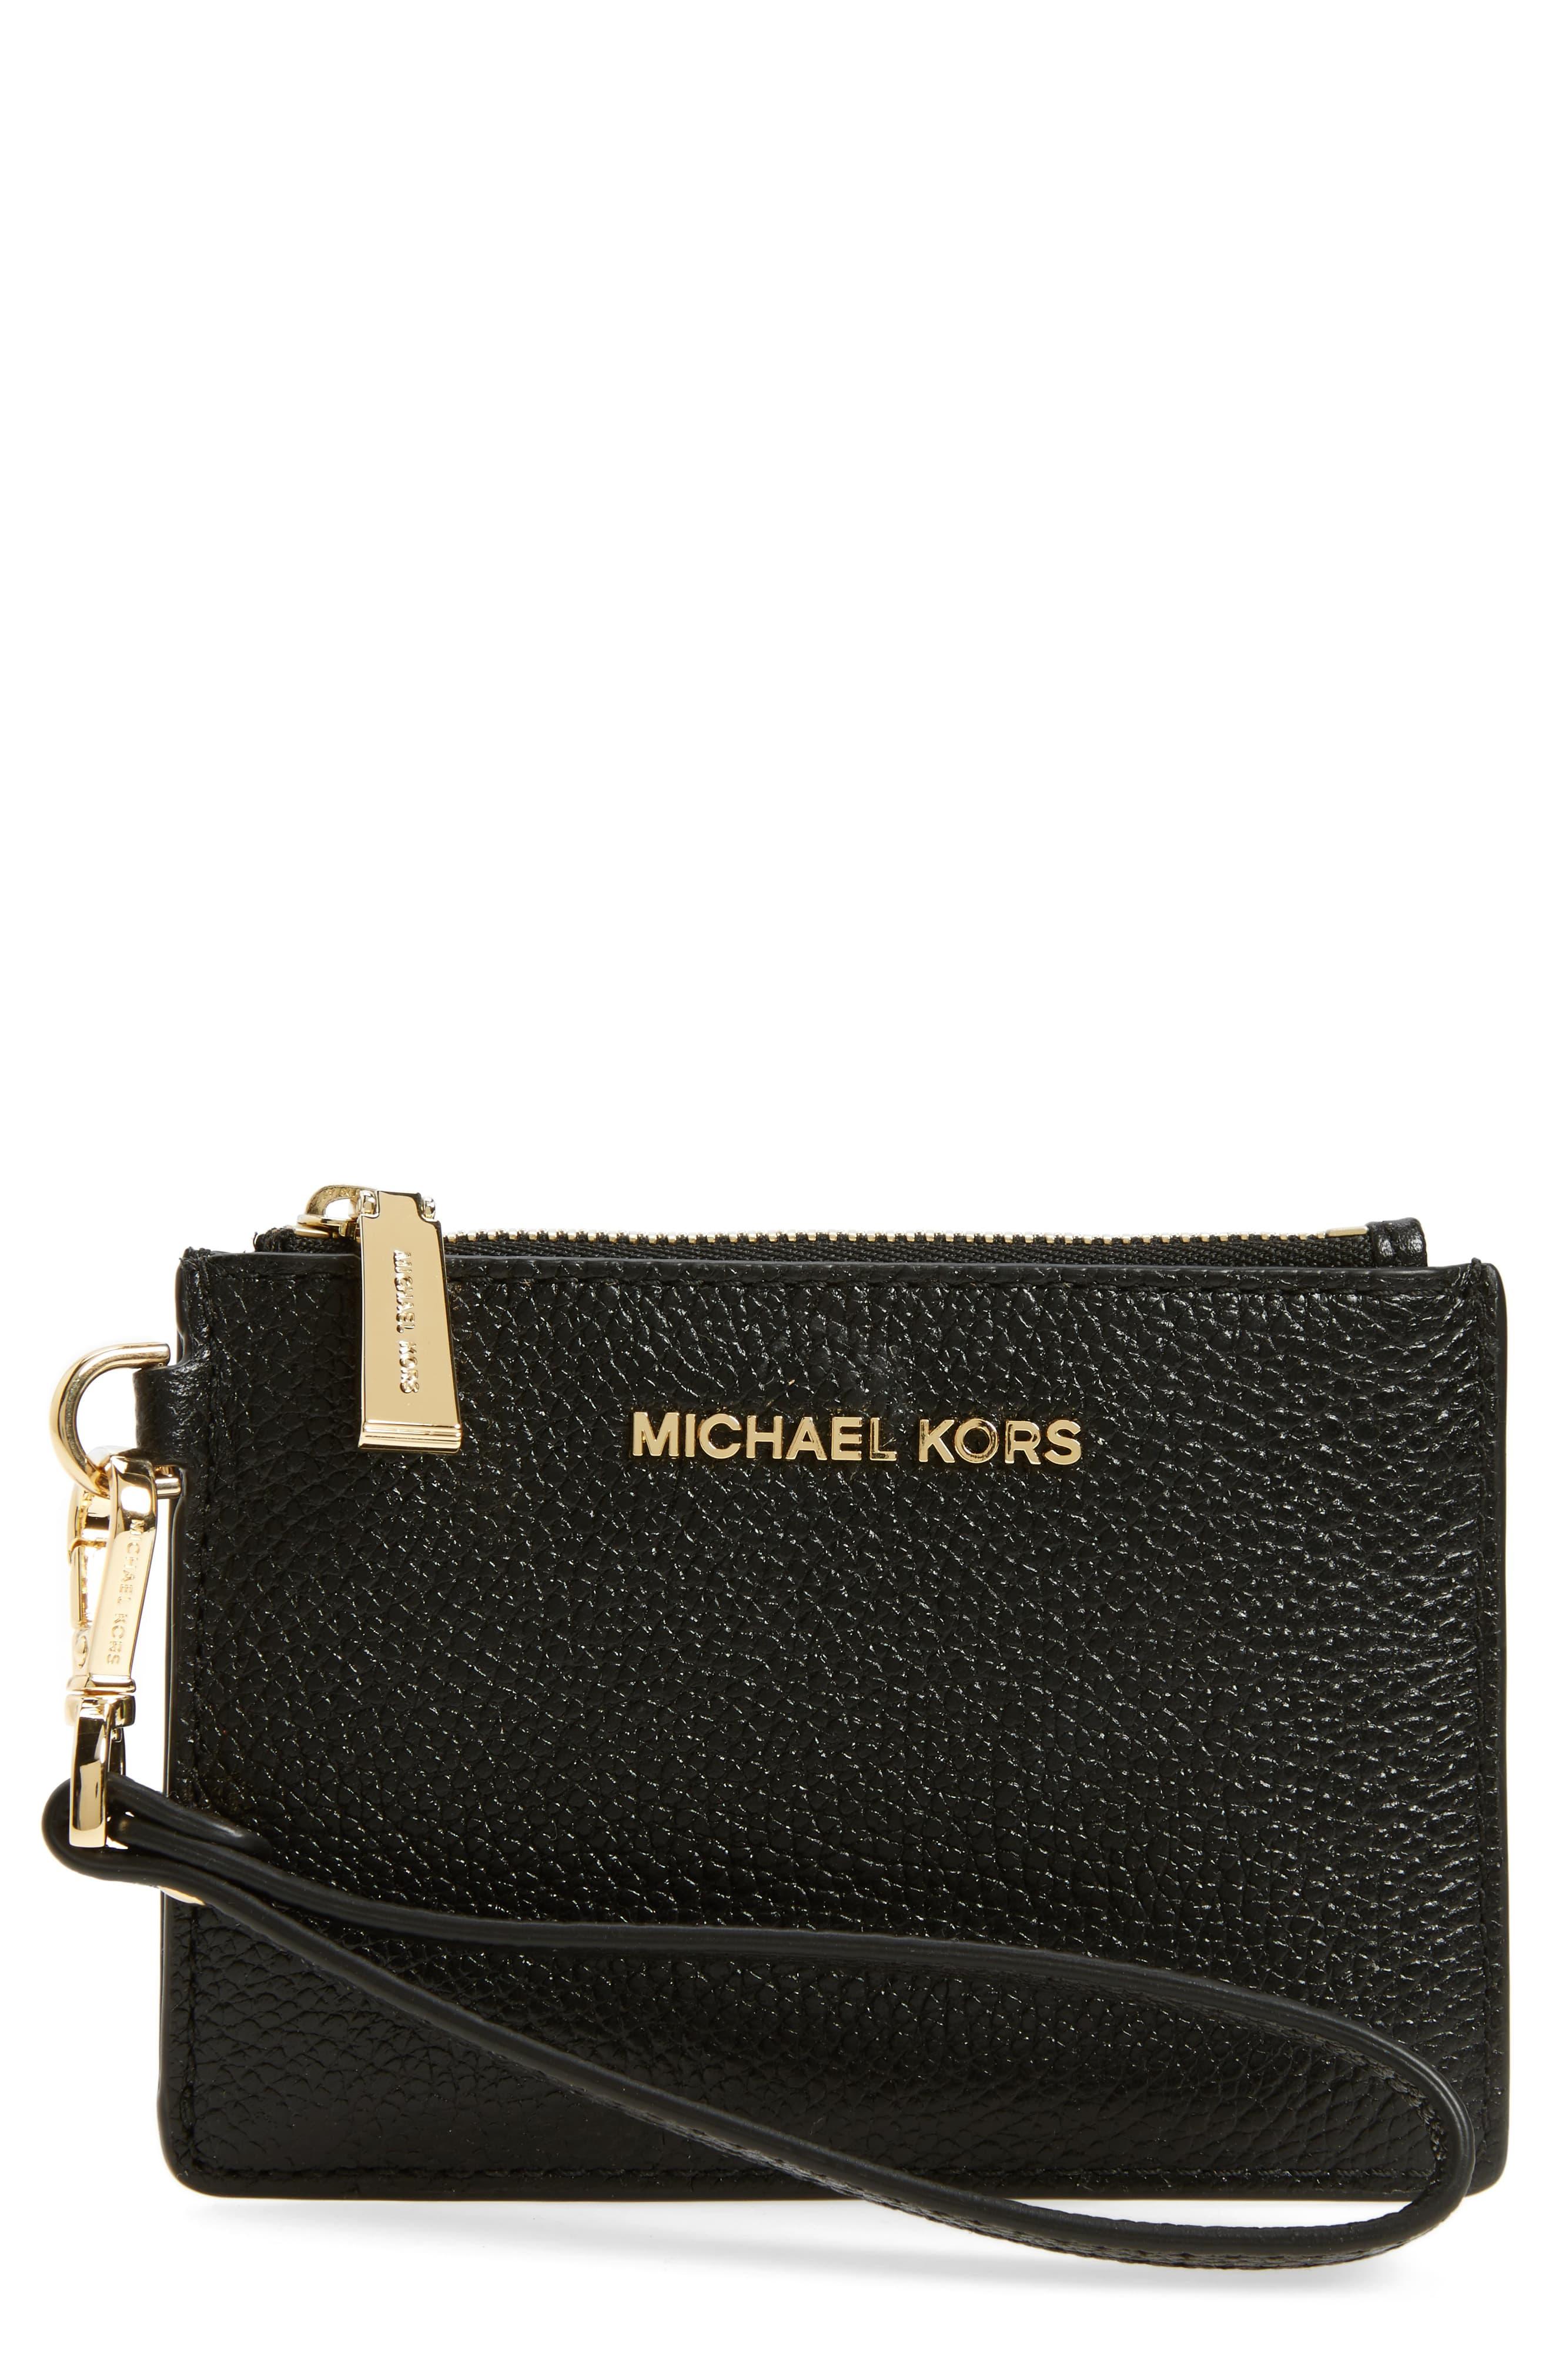 MICHAEL Michael Kors Small Mercer Leather Rfid Coin Purse in Black - Lyst